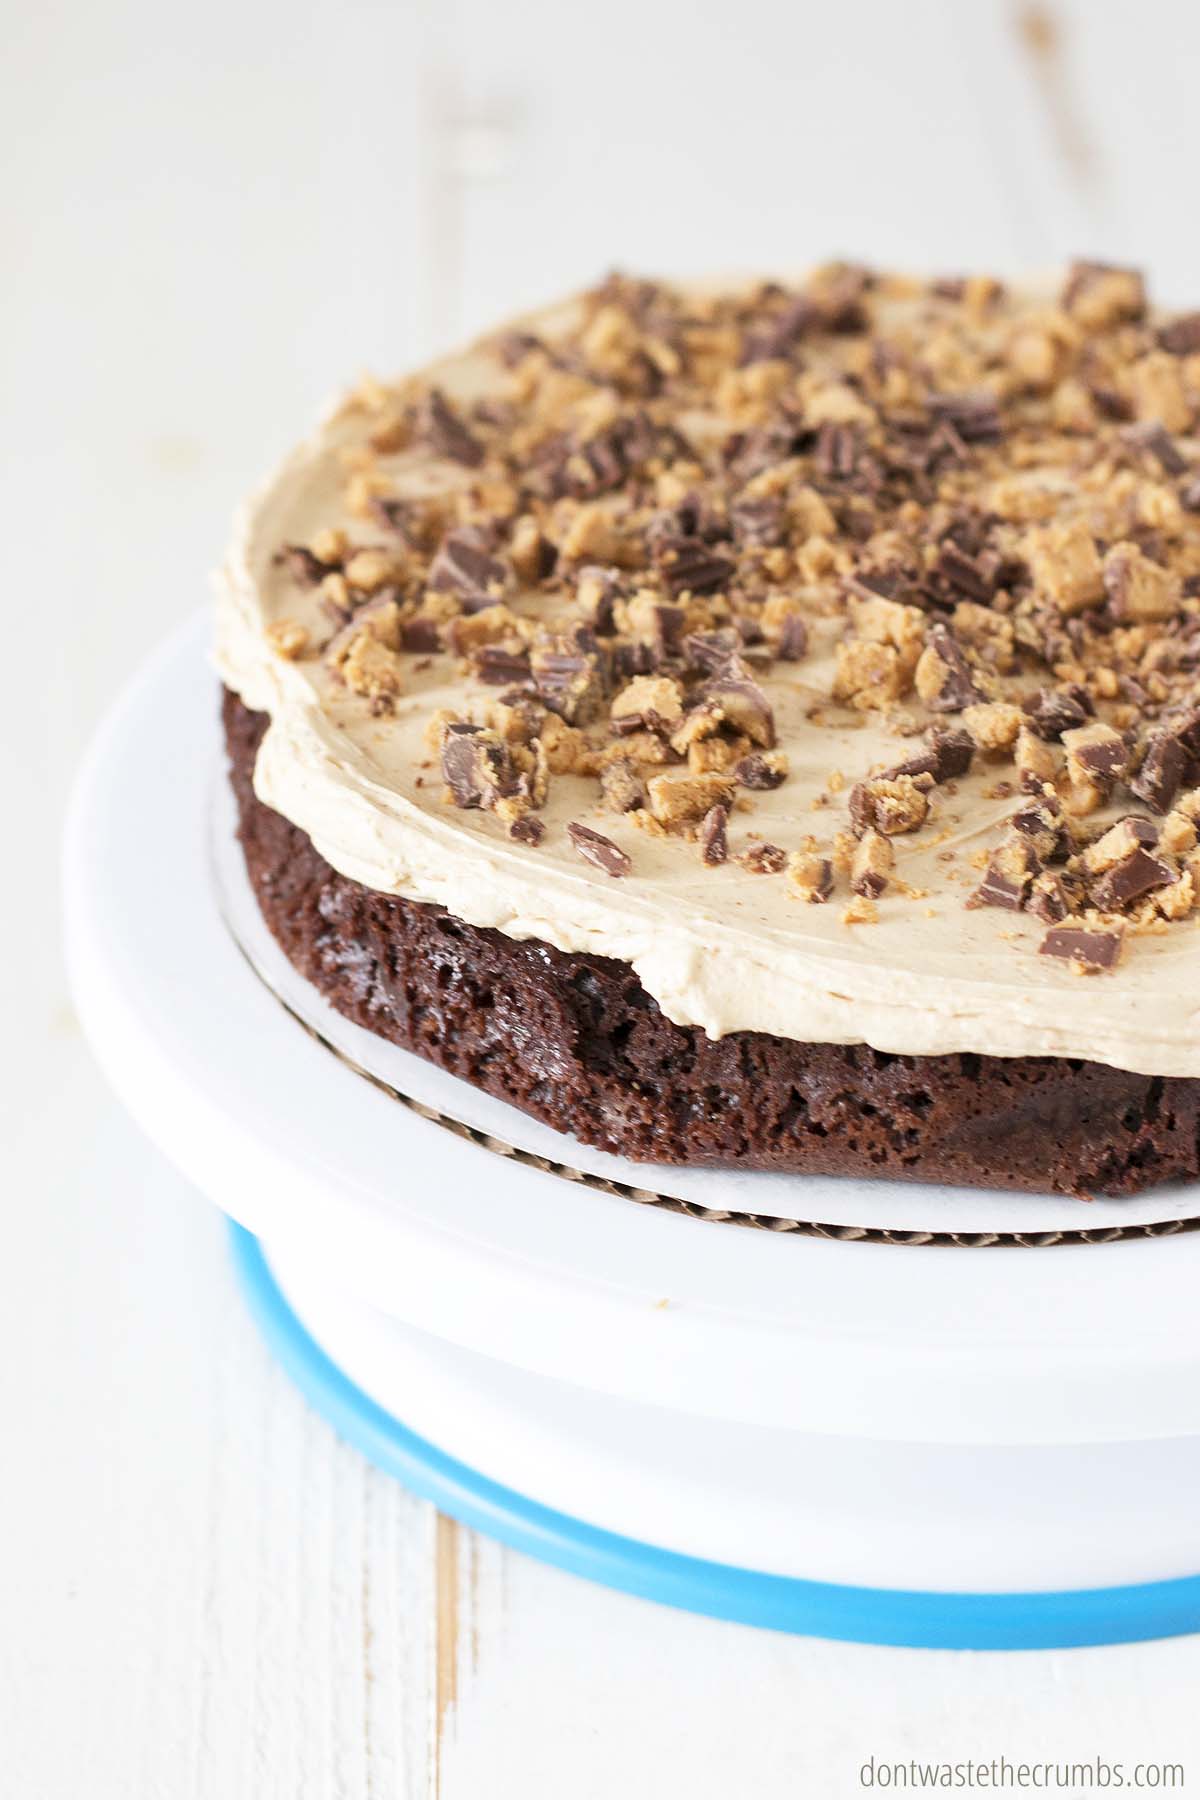 The bottom layer of chocolate peanut butter cake topped with peanut butter frosting and chopped peanut butter cups - on a cake stand.